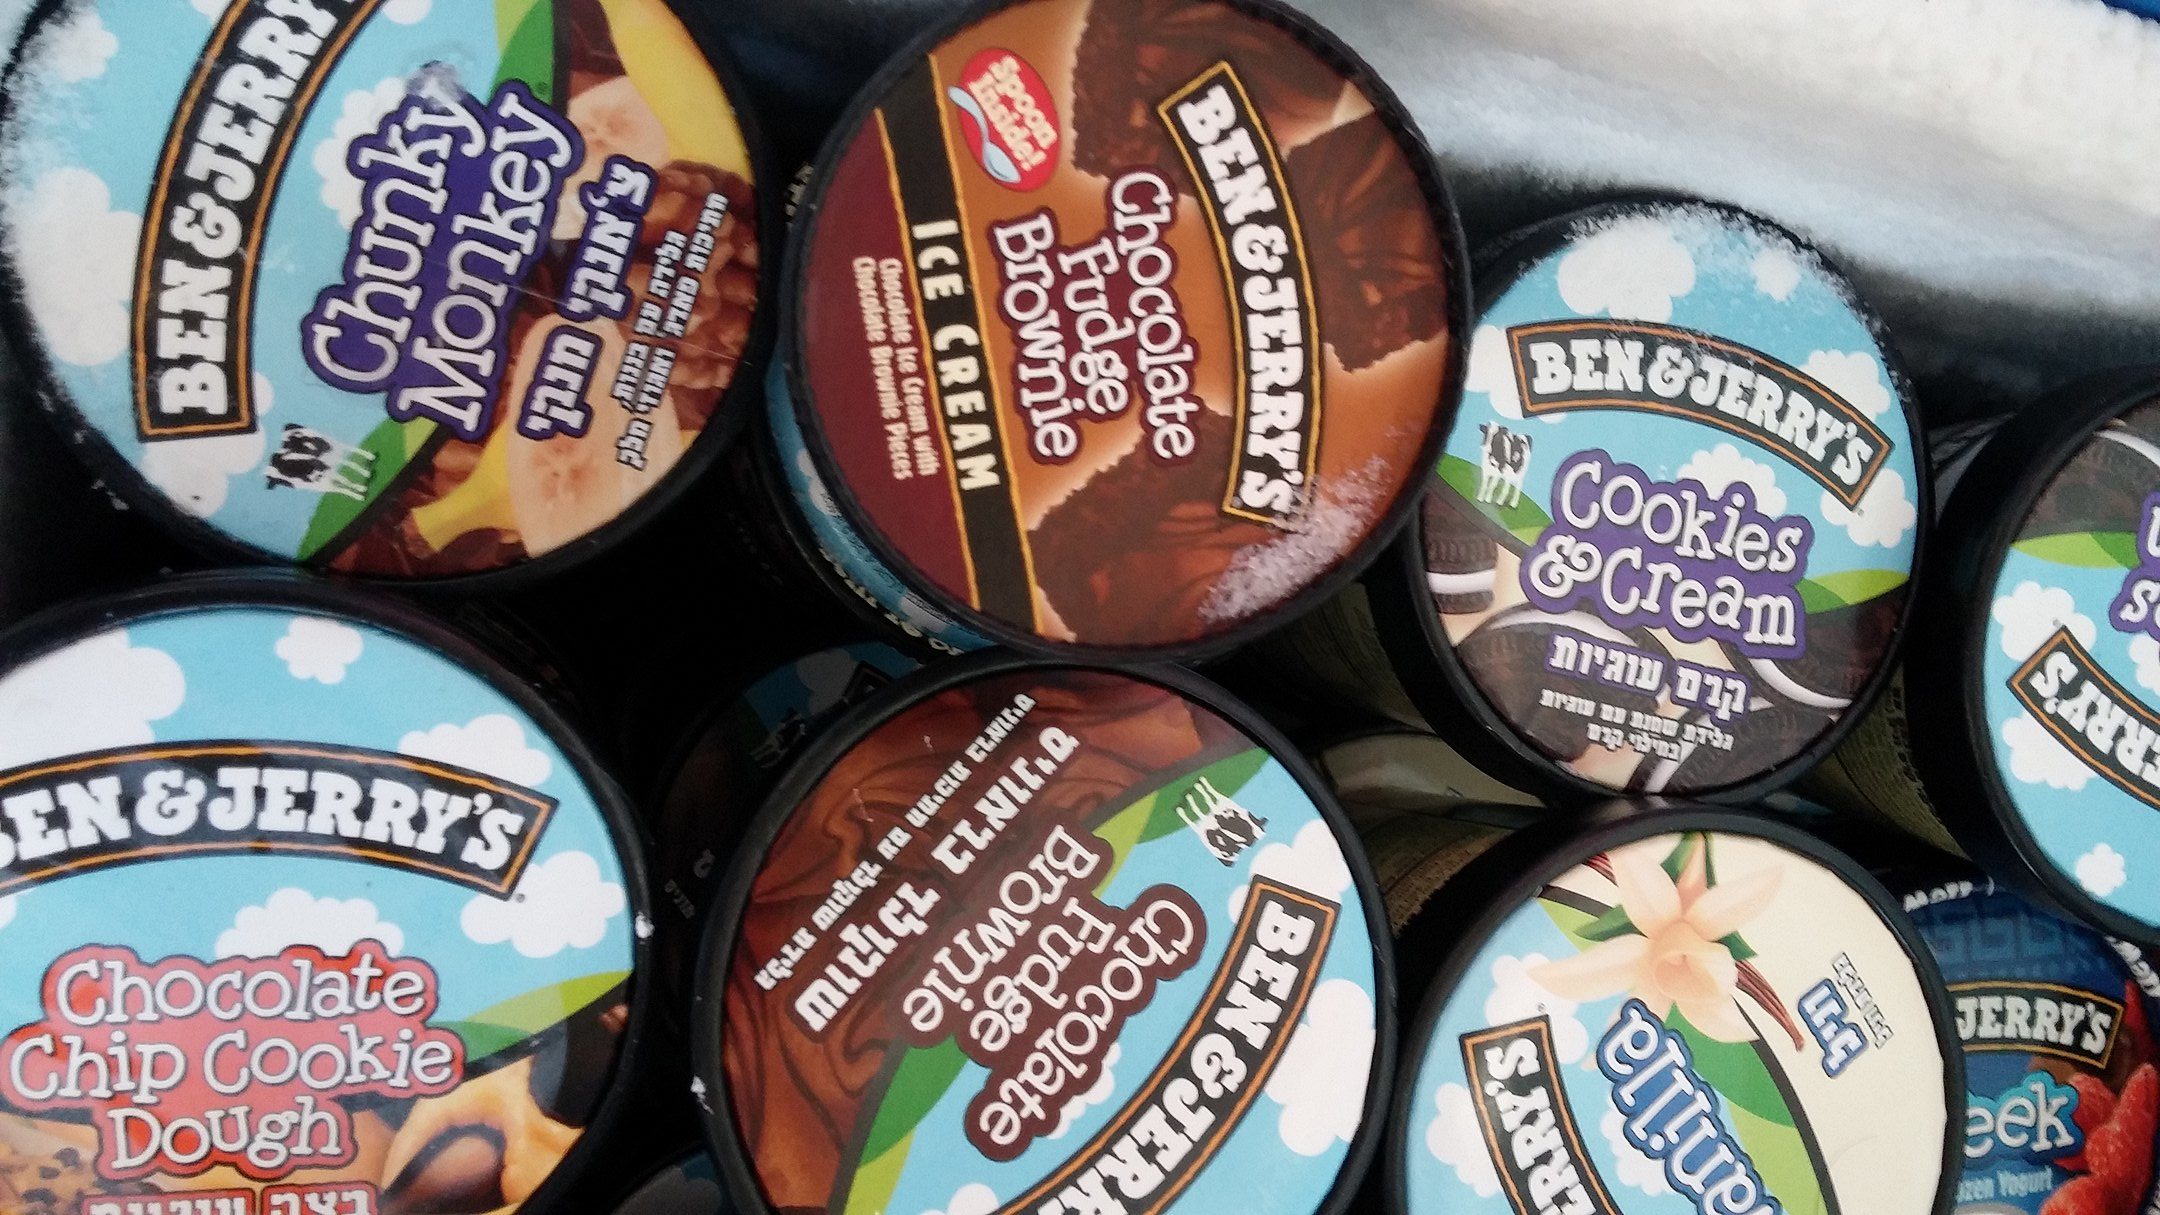 Ben & Jerry’s Will Continue To Be Sold in West Bank